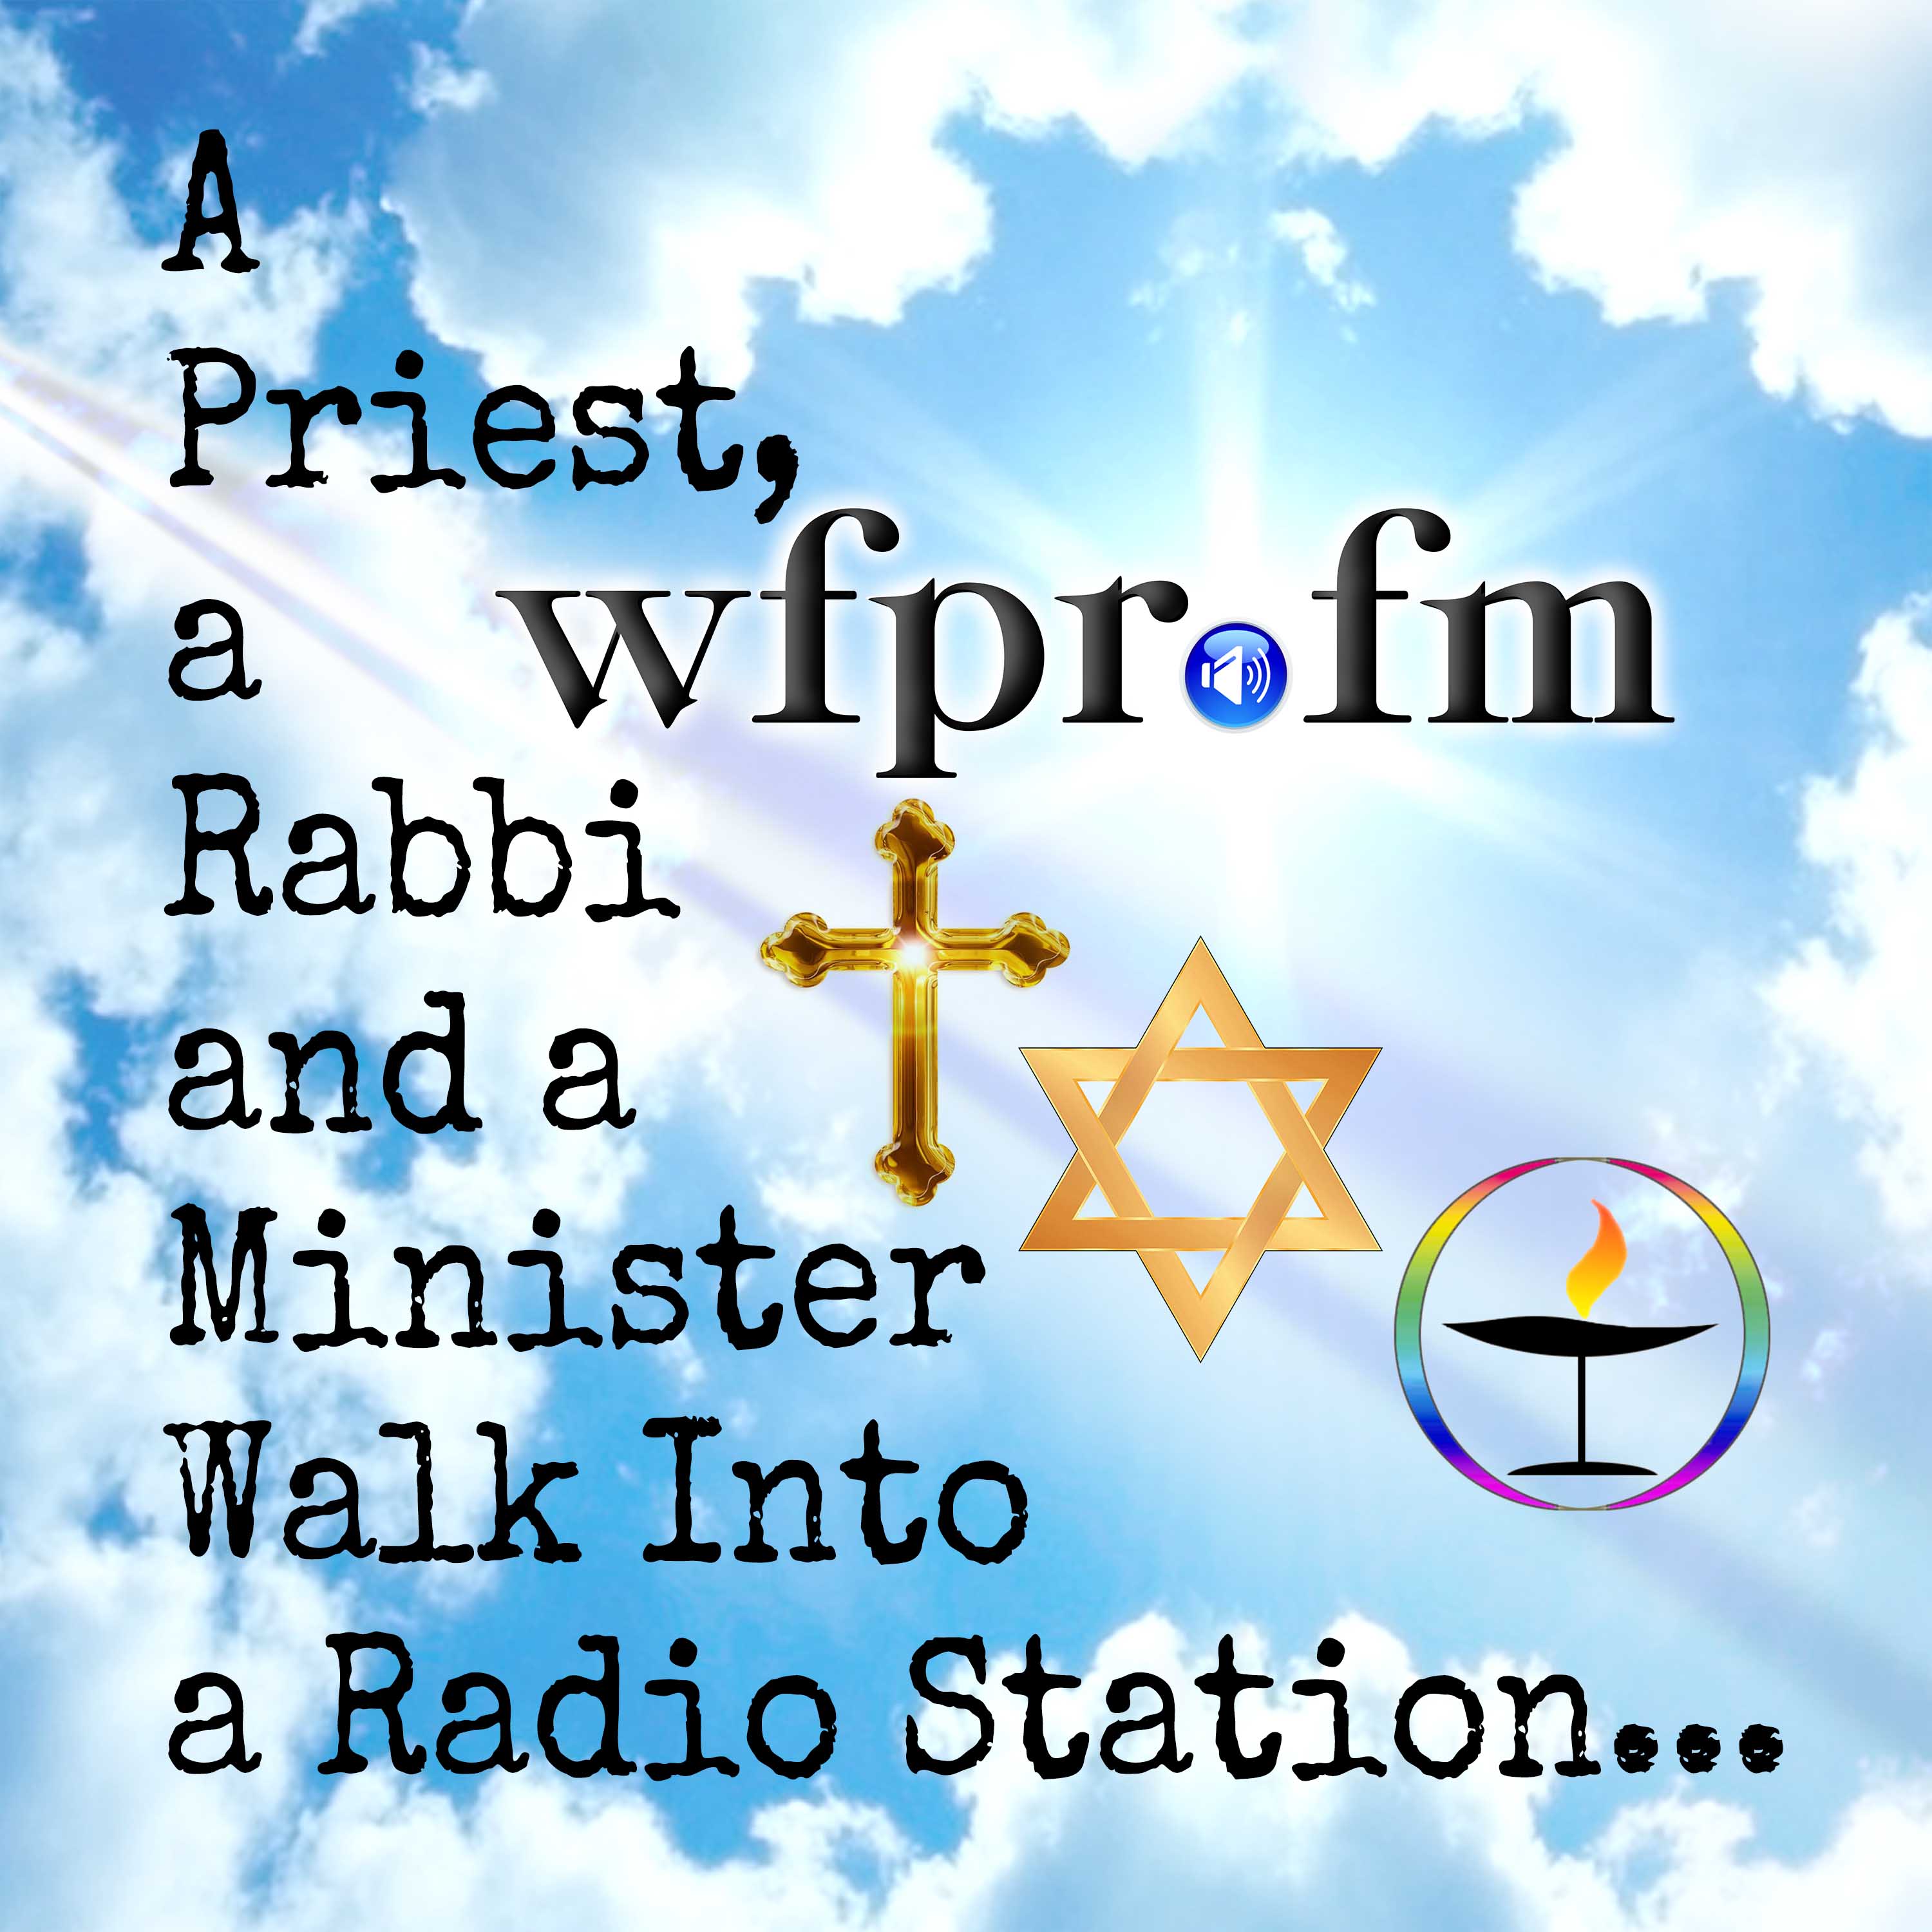 A Priest A Rabbi and A Minister Walk Into A Radio Station: 026 - Giving Thanks and Gratitude (audio)